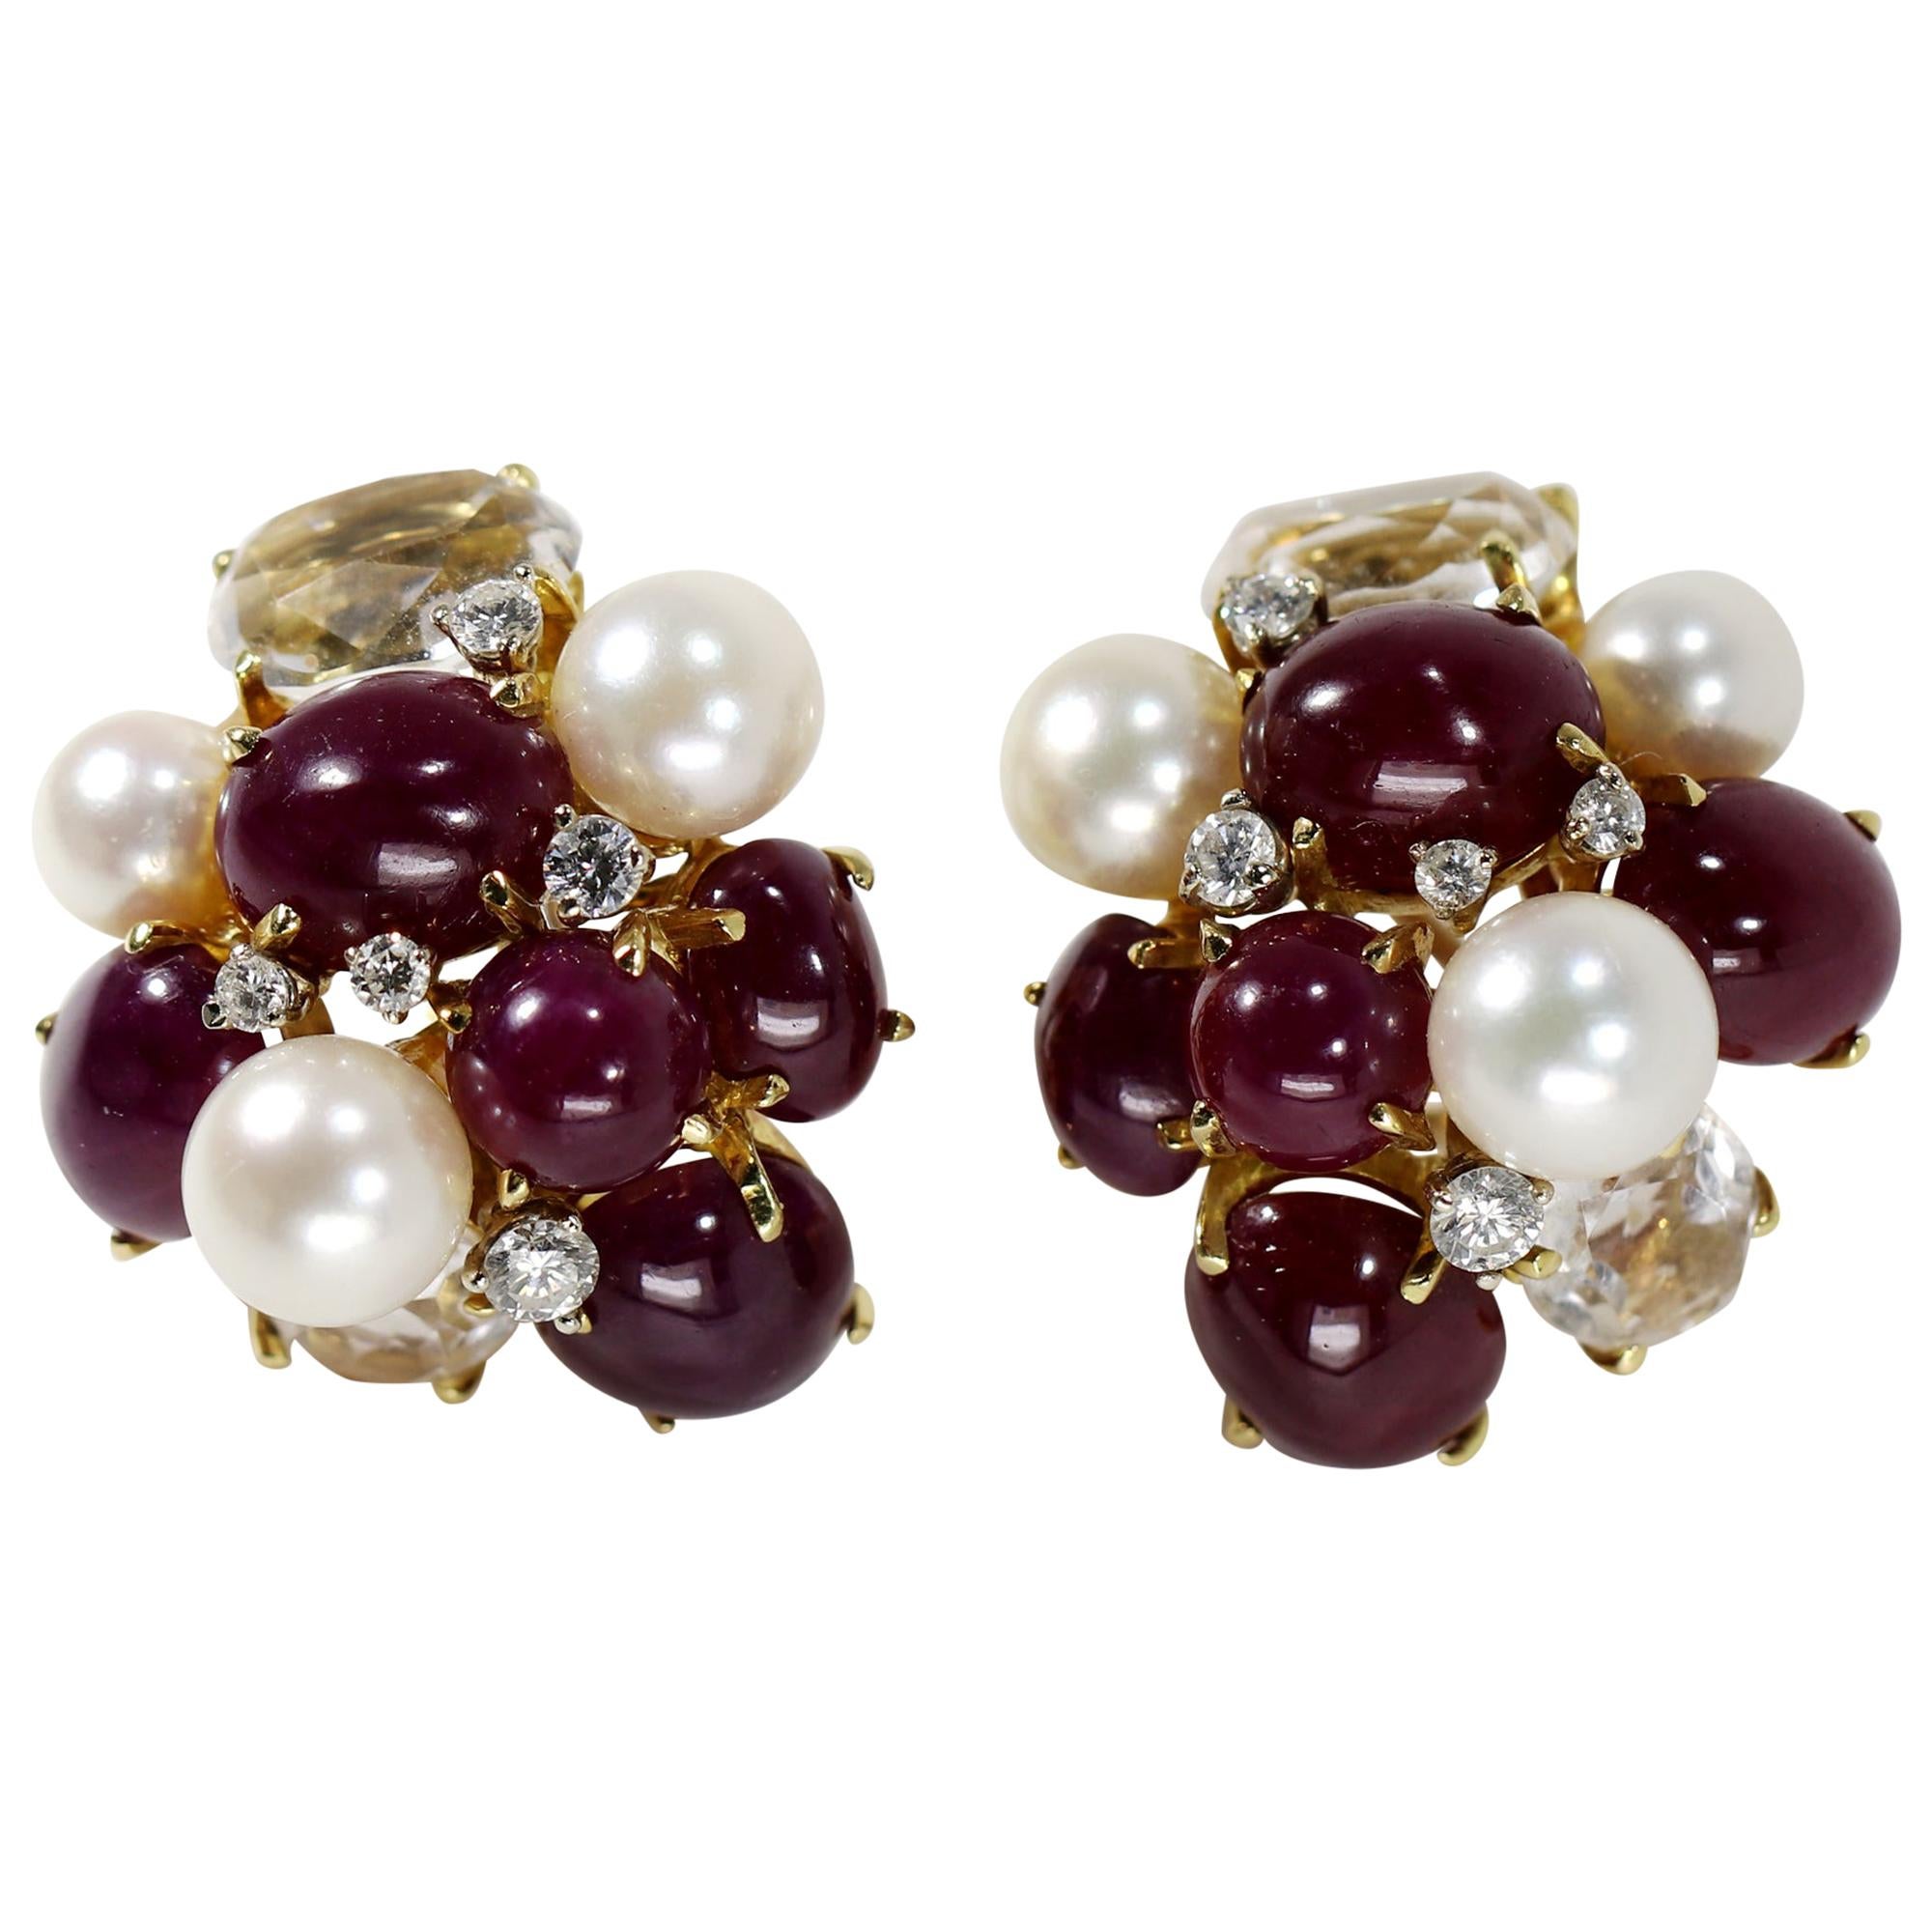 Seaman Schepps Bubble Earrings with Rubies Diamonds and Pearls